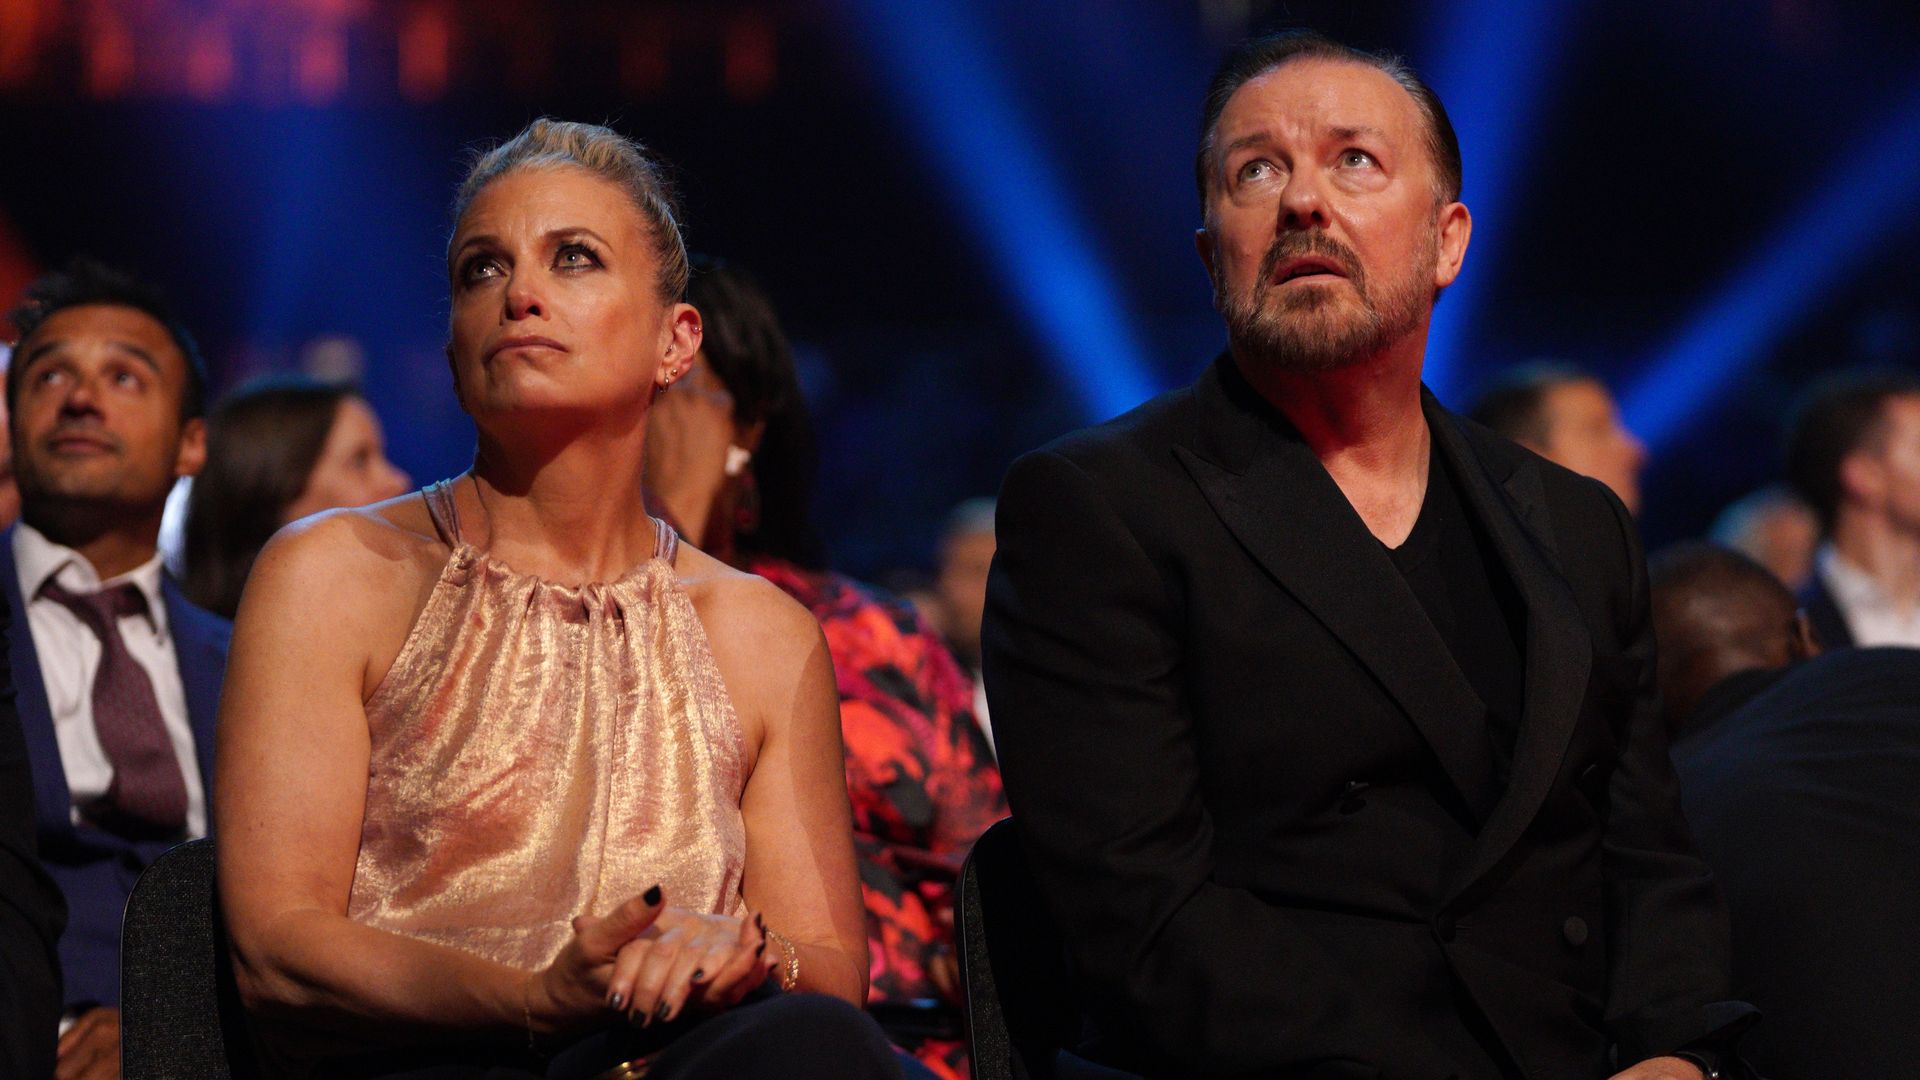 Jane Fallon and Ricky Gervais at awards ceremony